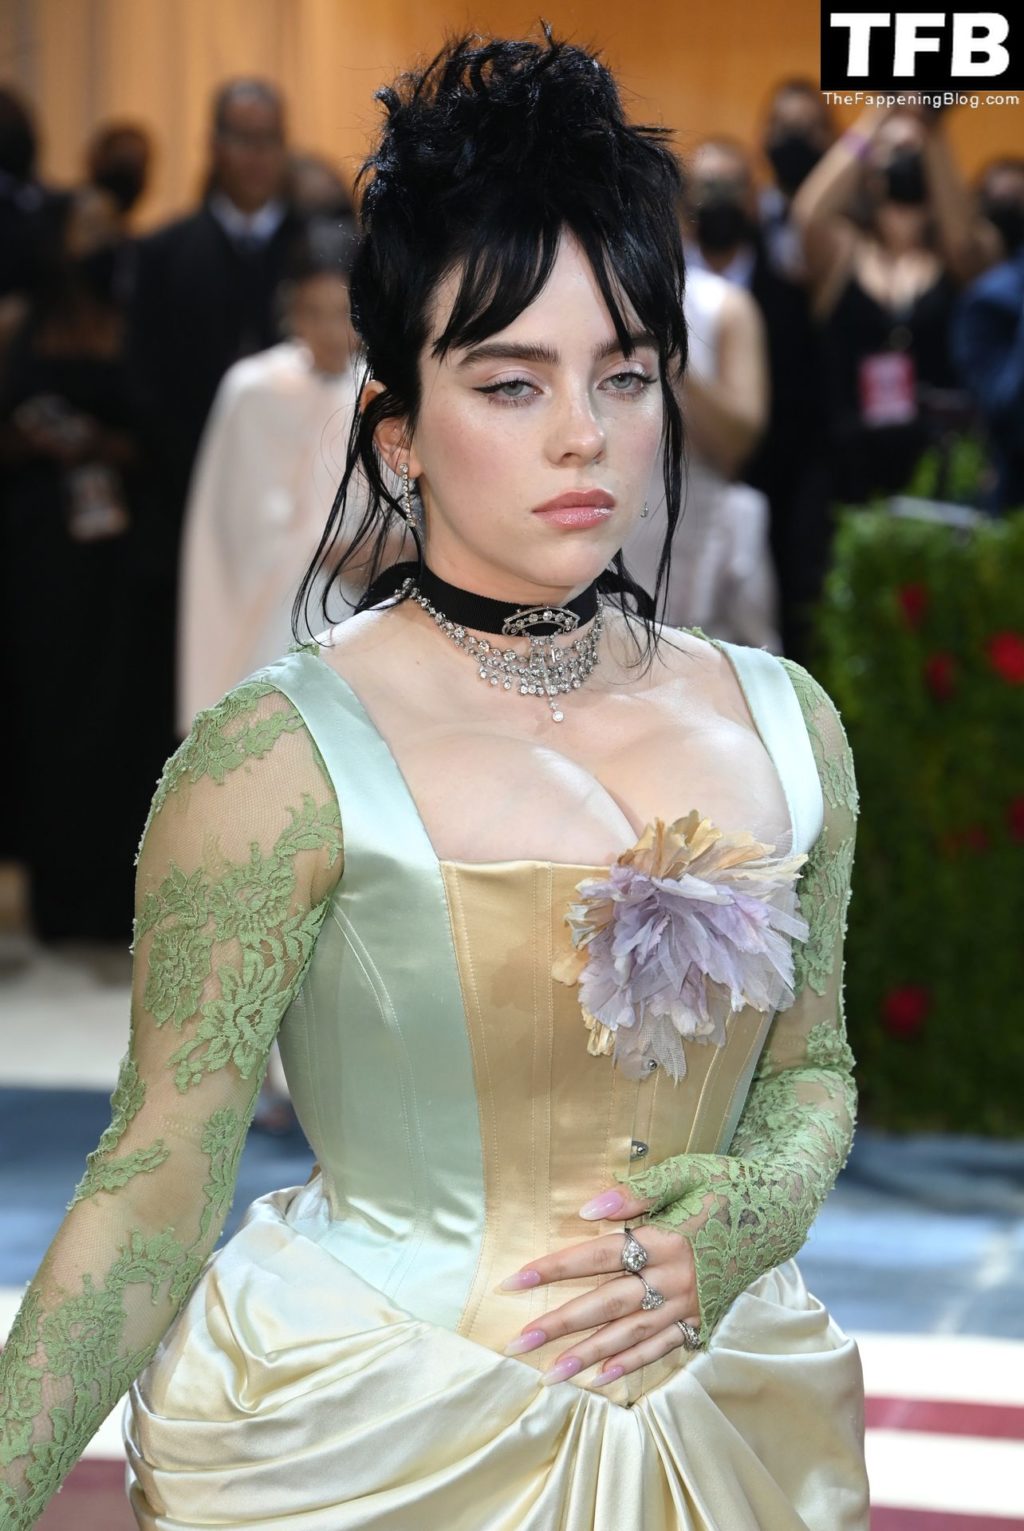 Billie Eilish Sexy The Fappening Blog 102 1024x1531 - Billie Eilish Showcases Nice Cleavage at The 2022 Met Gala in NYC (155 Photos)